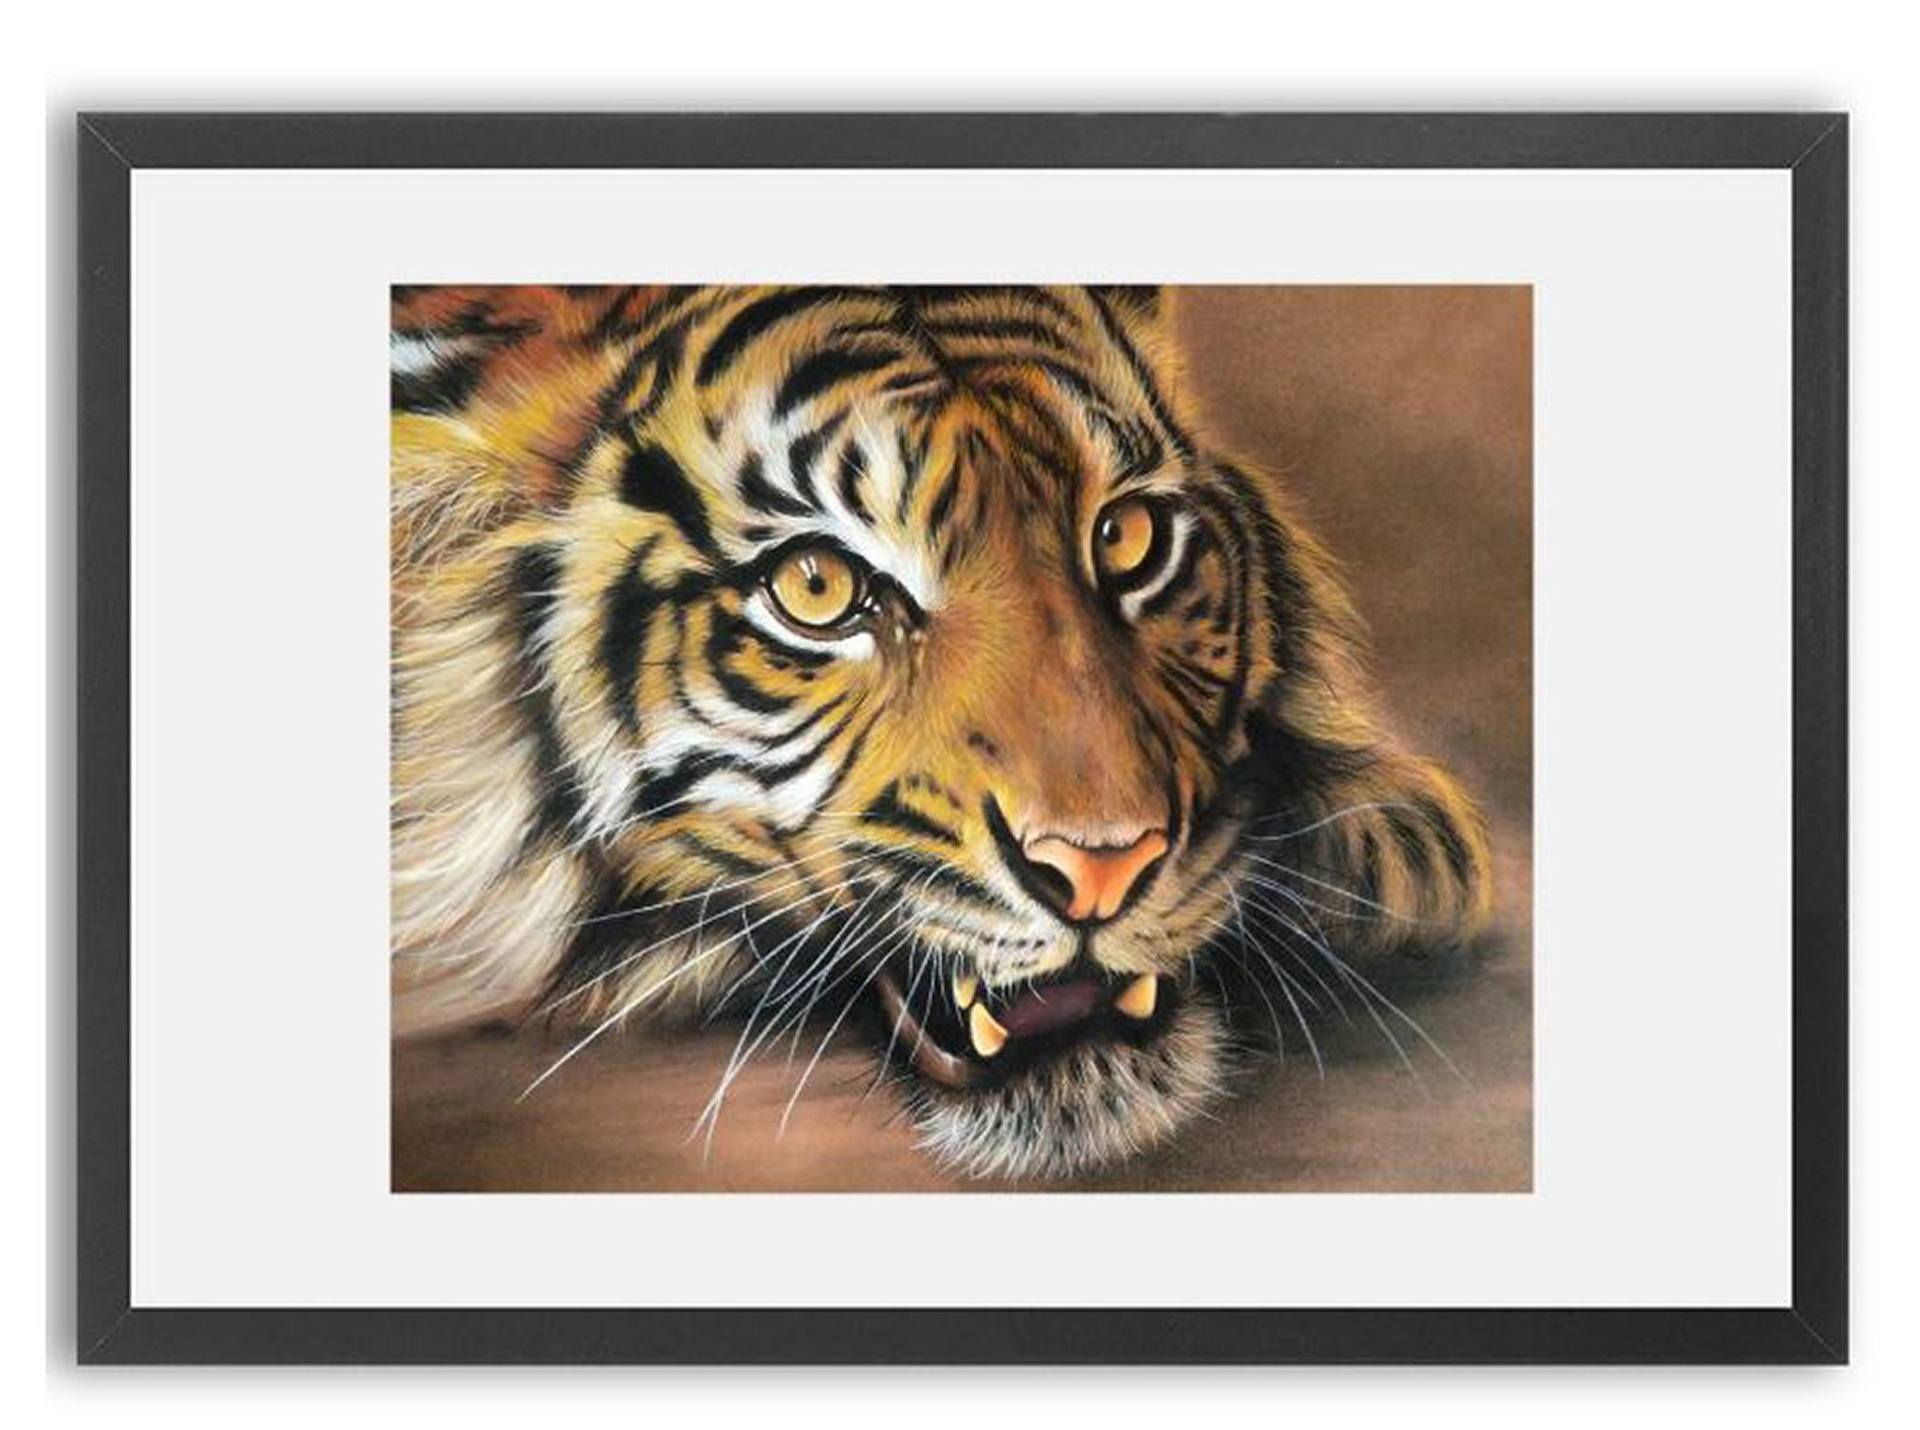 Tiger's Stare lV Painting by Sean Afford